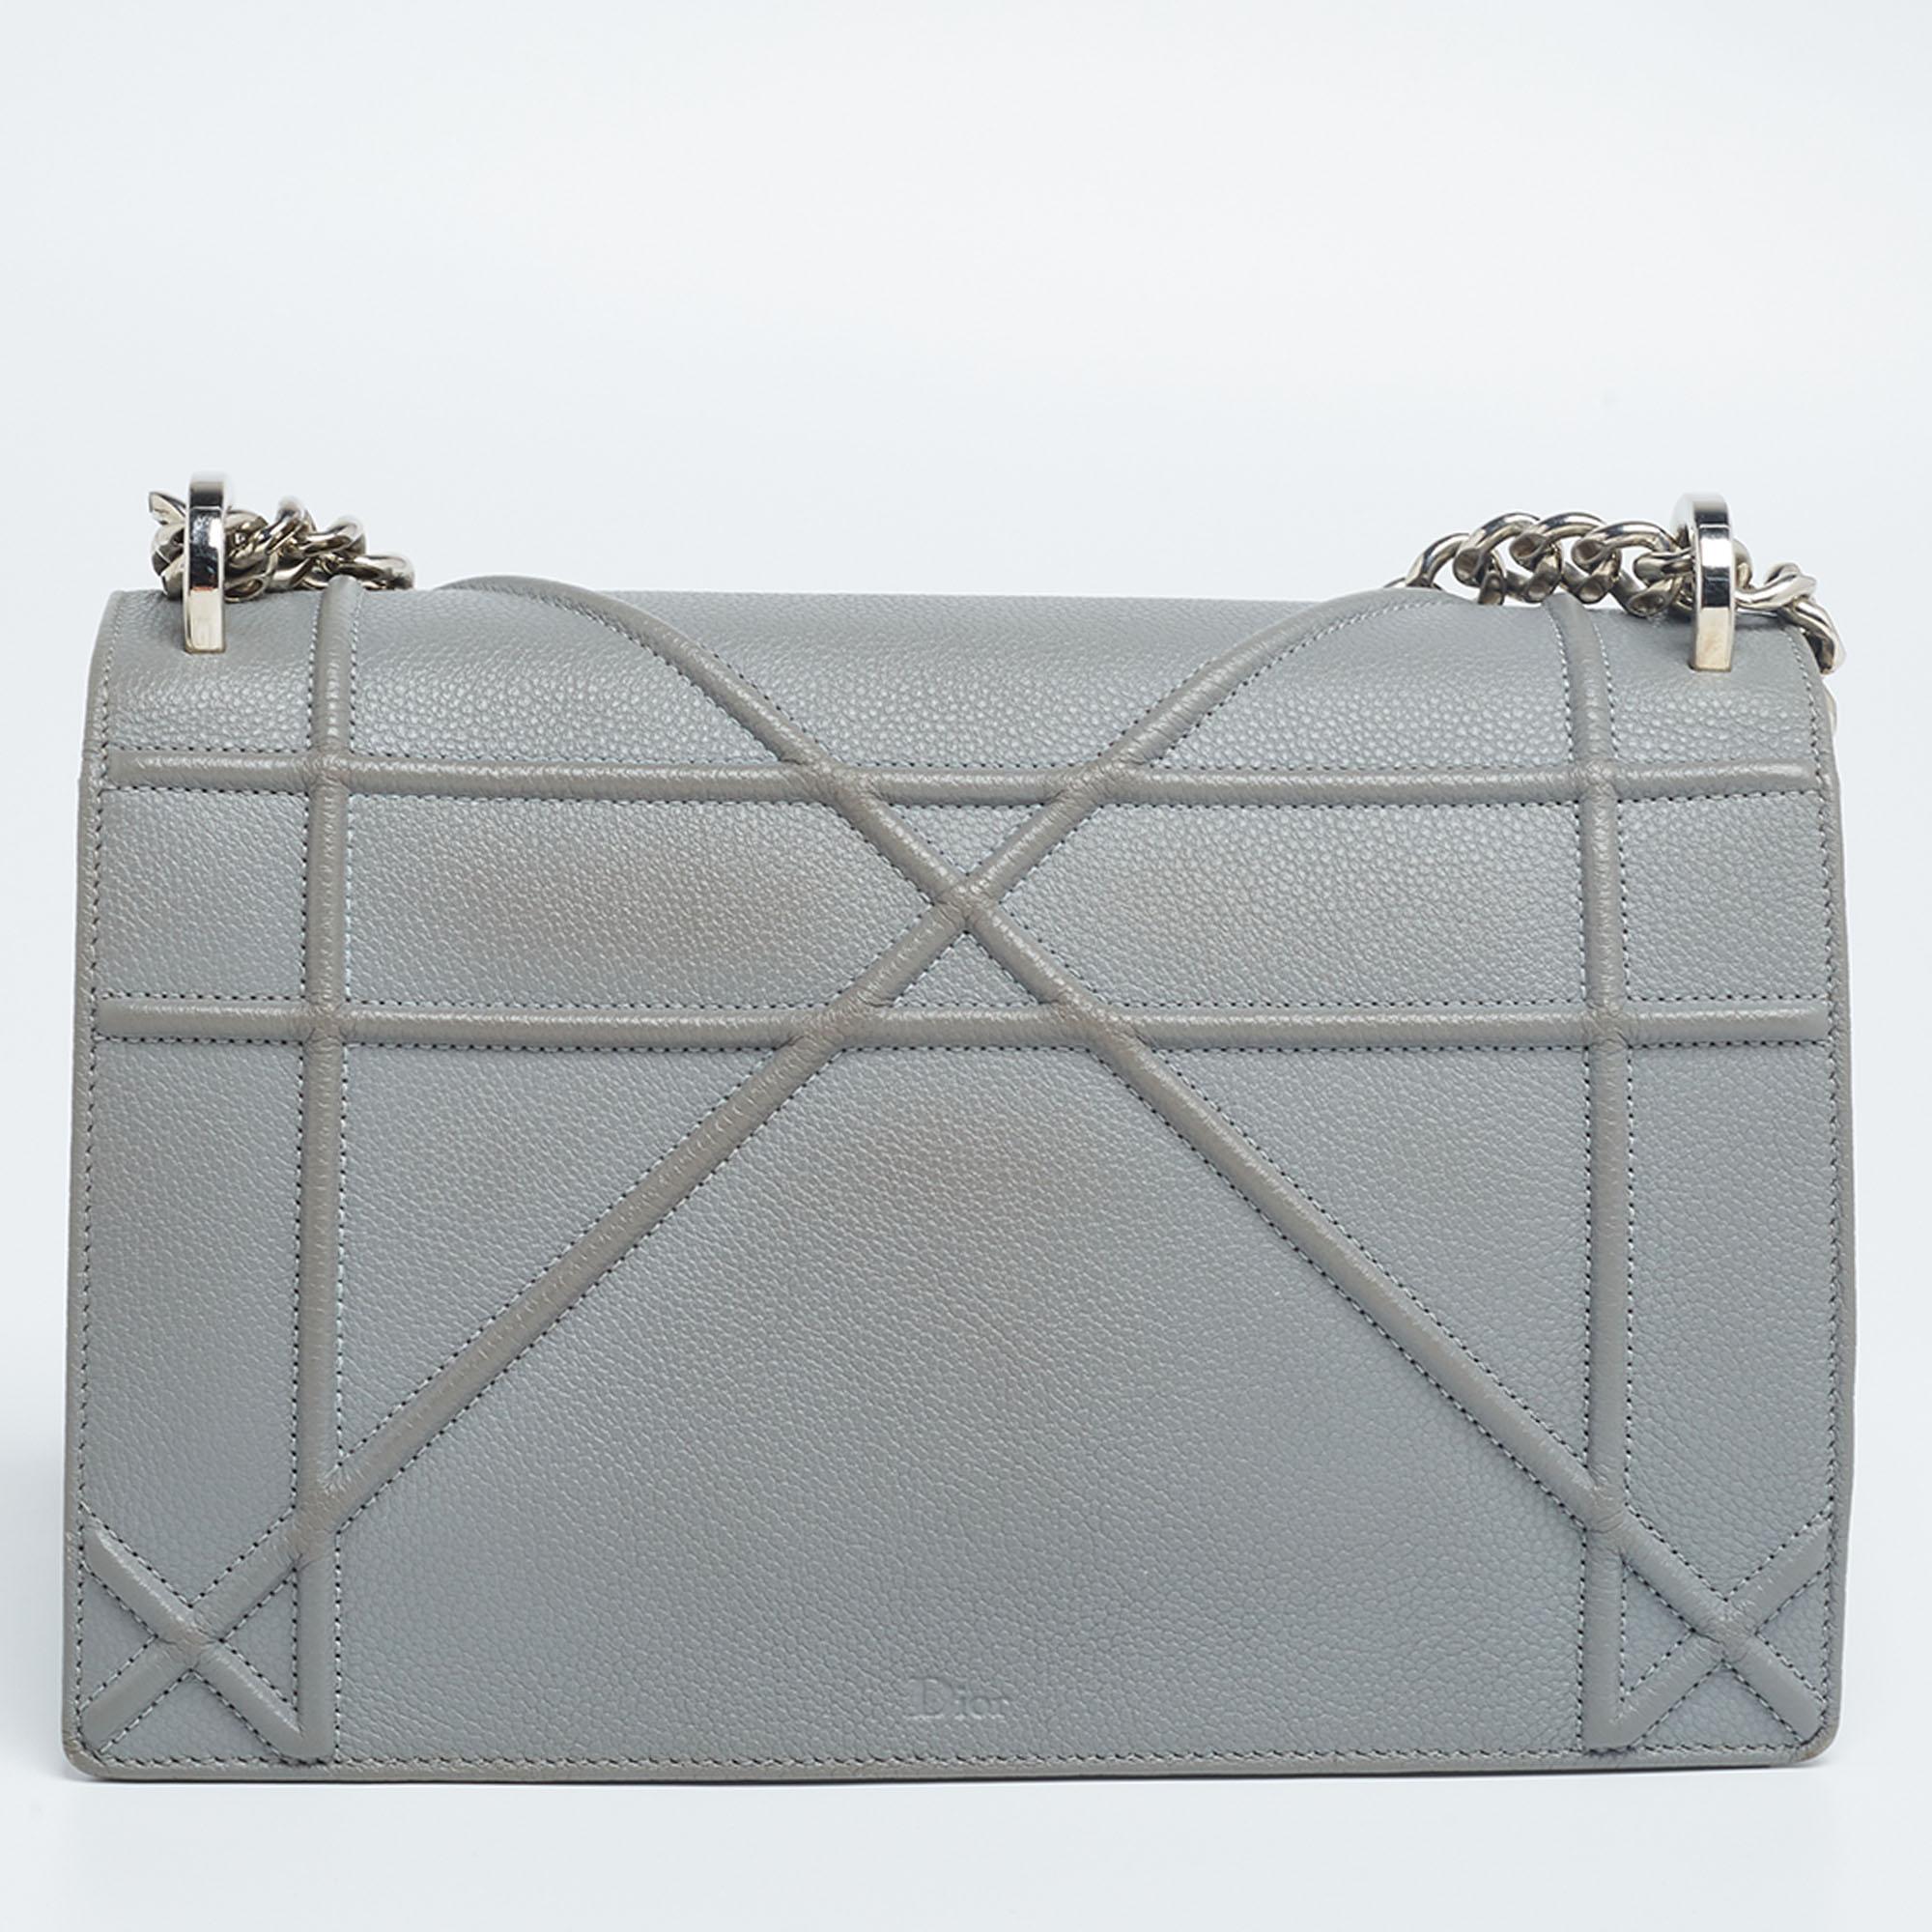 This Diorama shoulder bag from Dior is simply breathtaking and iconic in its style! From its structured silhouette to its artistic craftsmanship, this flawless bag manages to be your favorite in no time. It is made from grey leather, which is